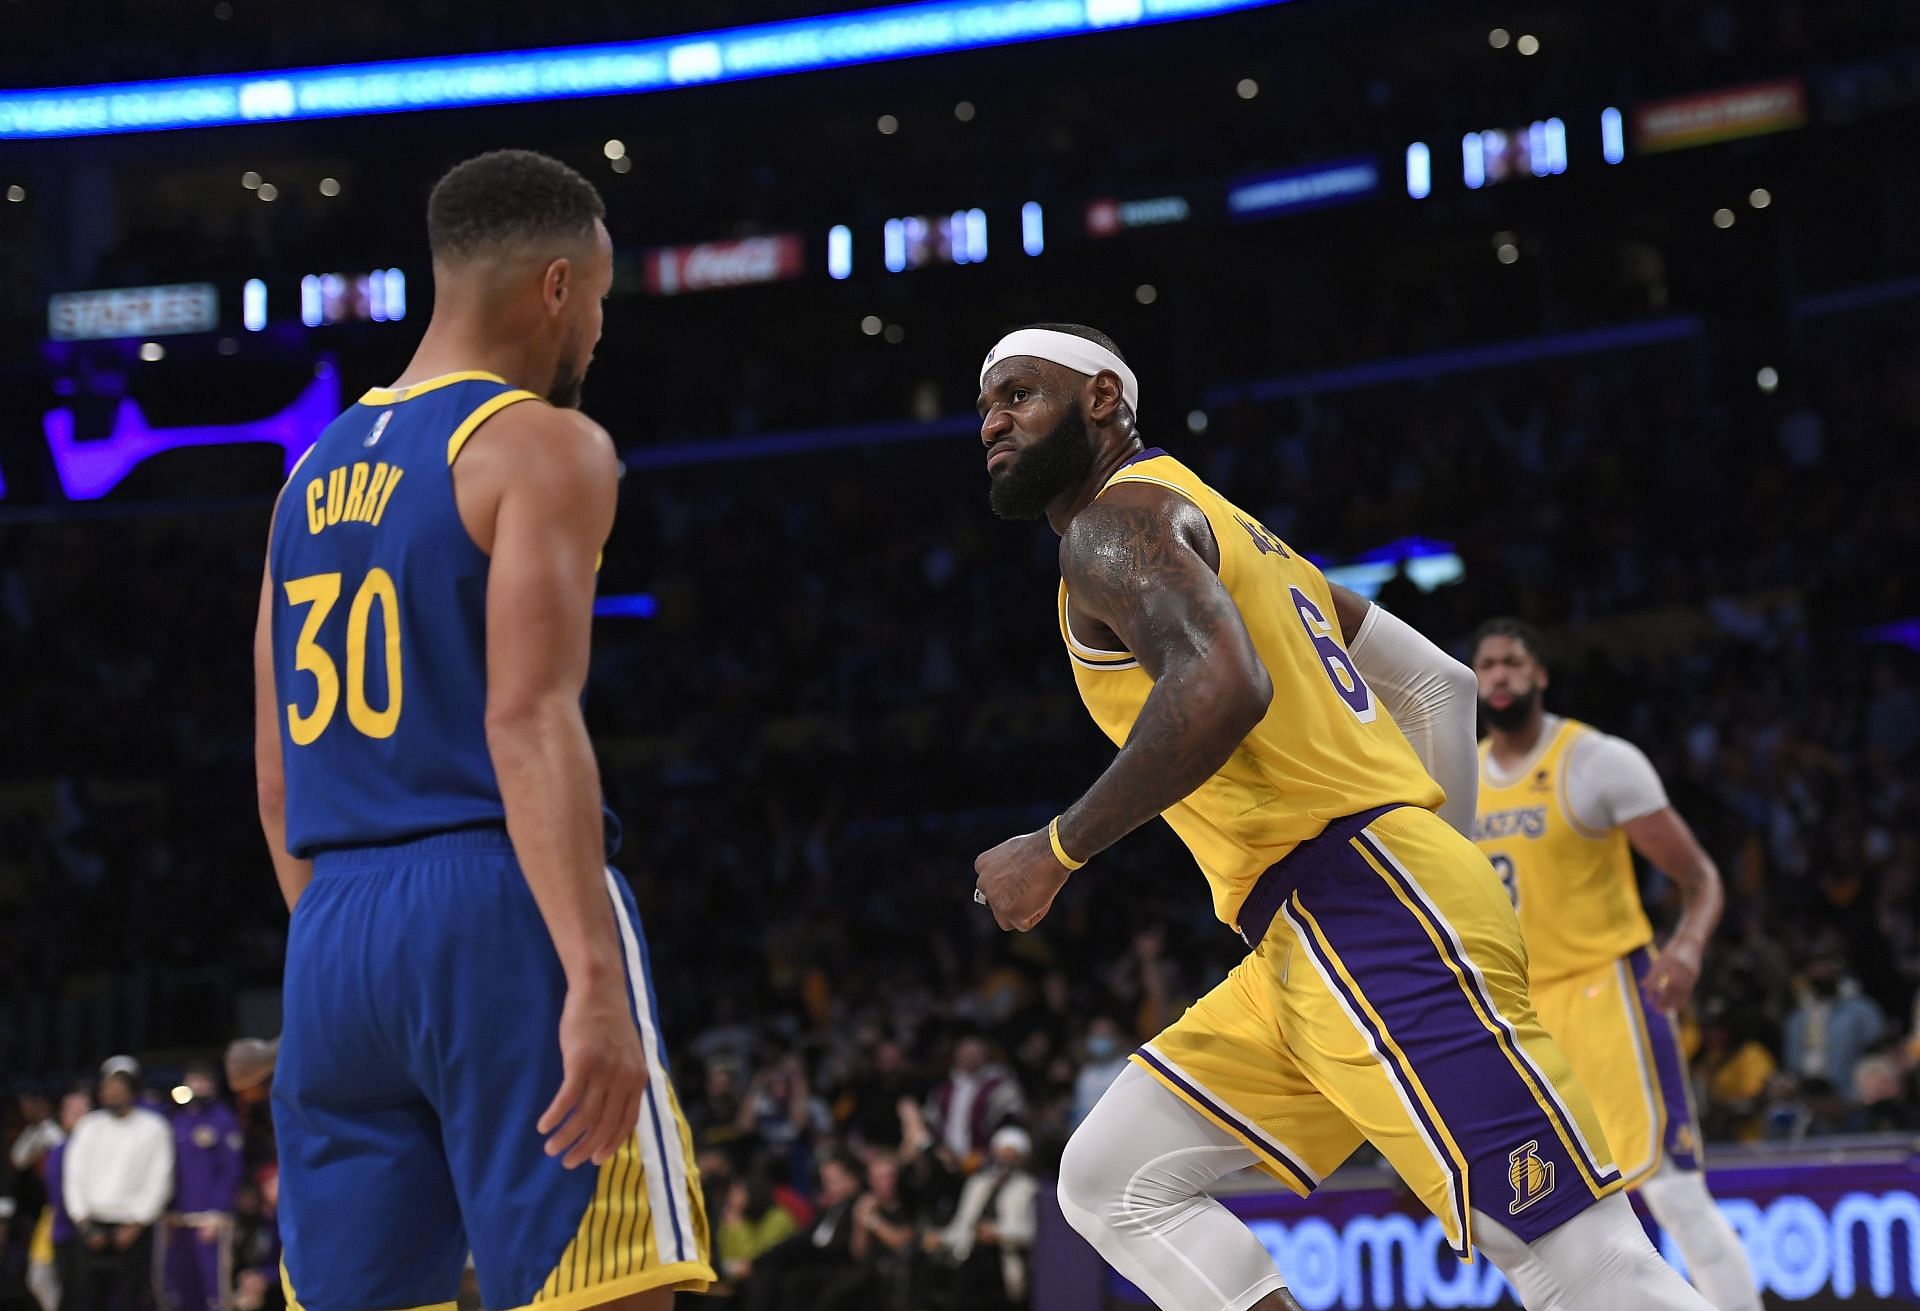 LeBron James (6) of the LA Lakers reacts after scoring against Stephen Curry (30) of the Golden State Warriors at Staples Center on Oct. 19, 2021 in Los Angeles, Calif.